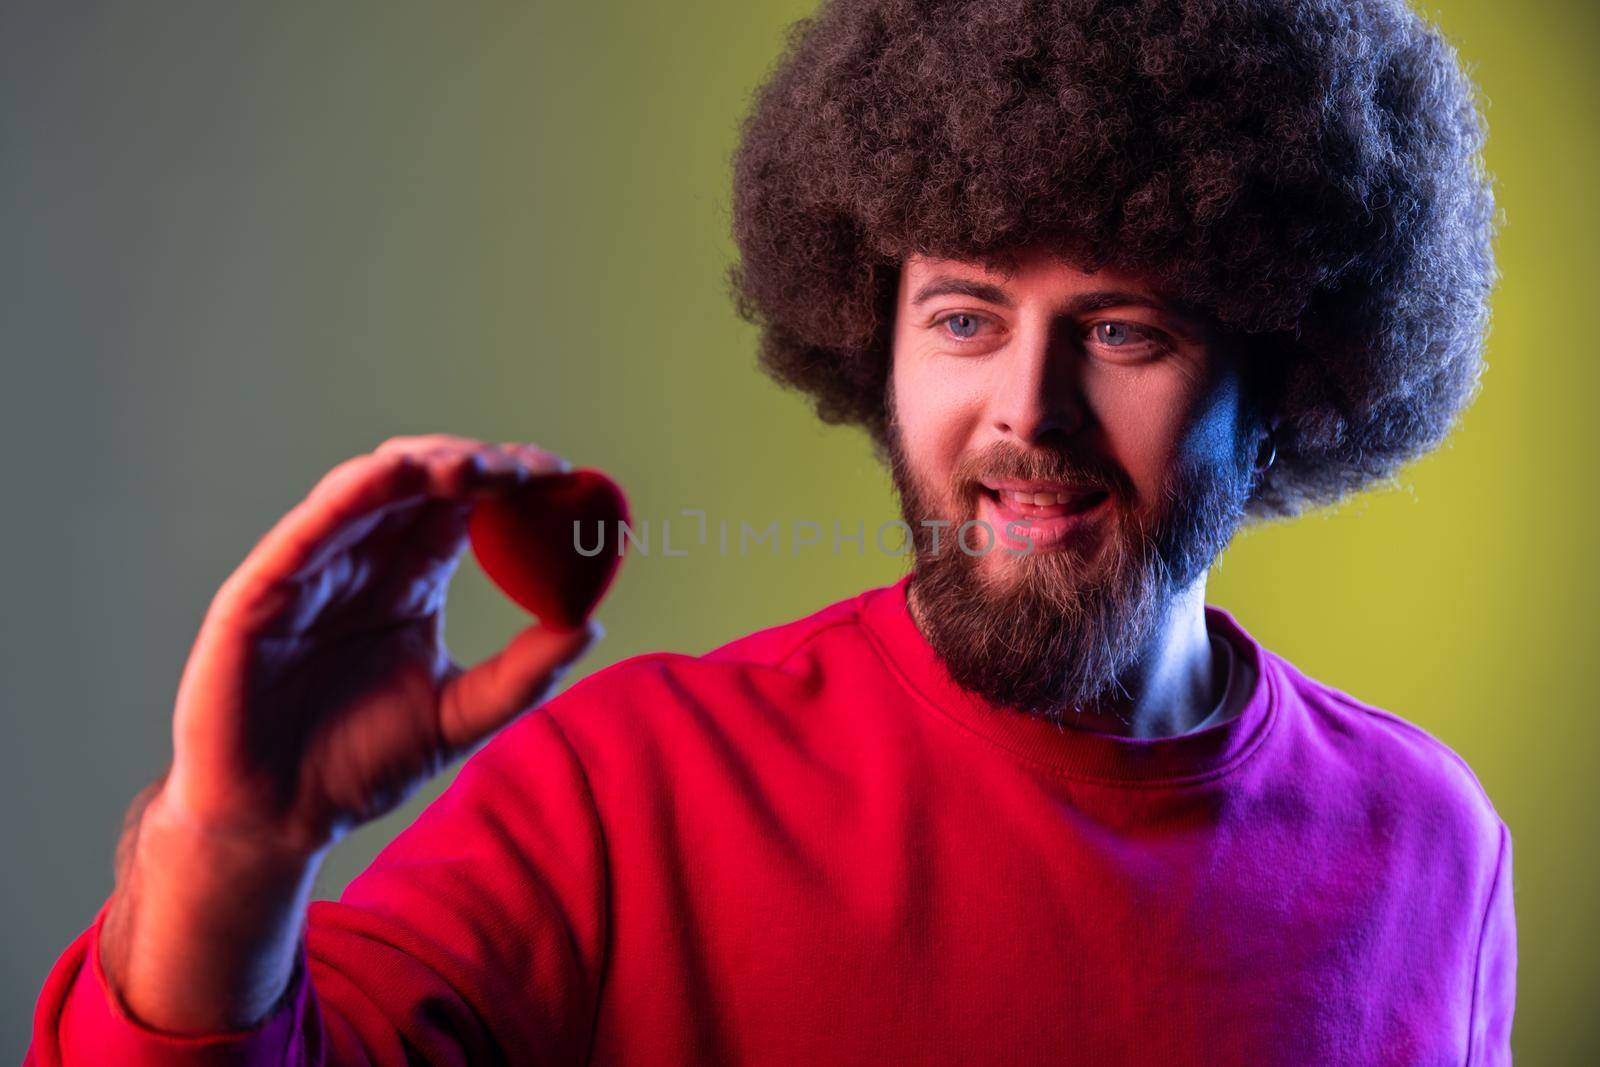 Man with Afro hairstyle holding in hands little red heart confessing his love romantic relationships by Khosro1